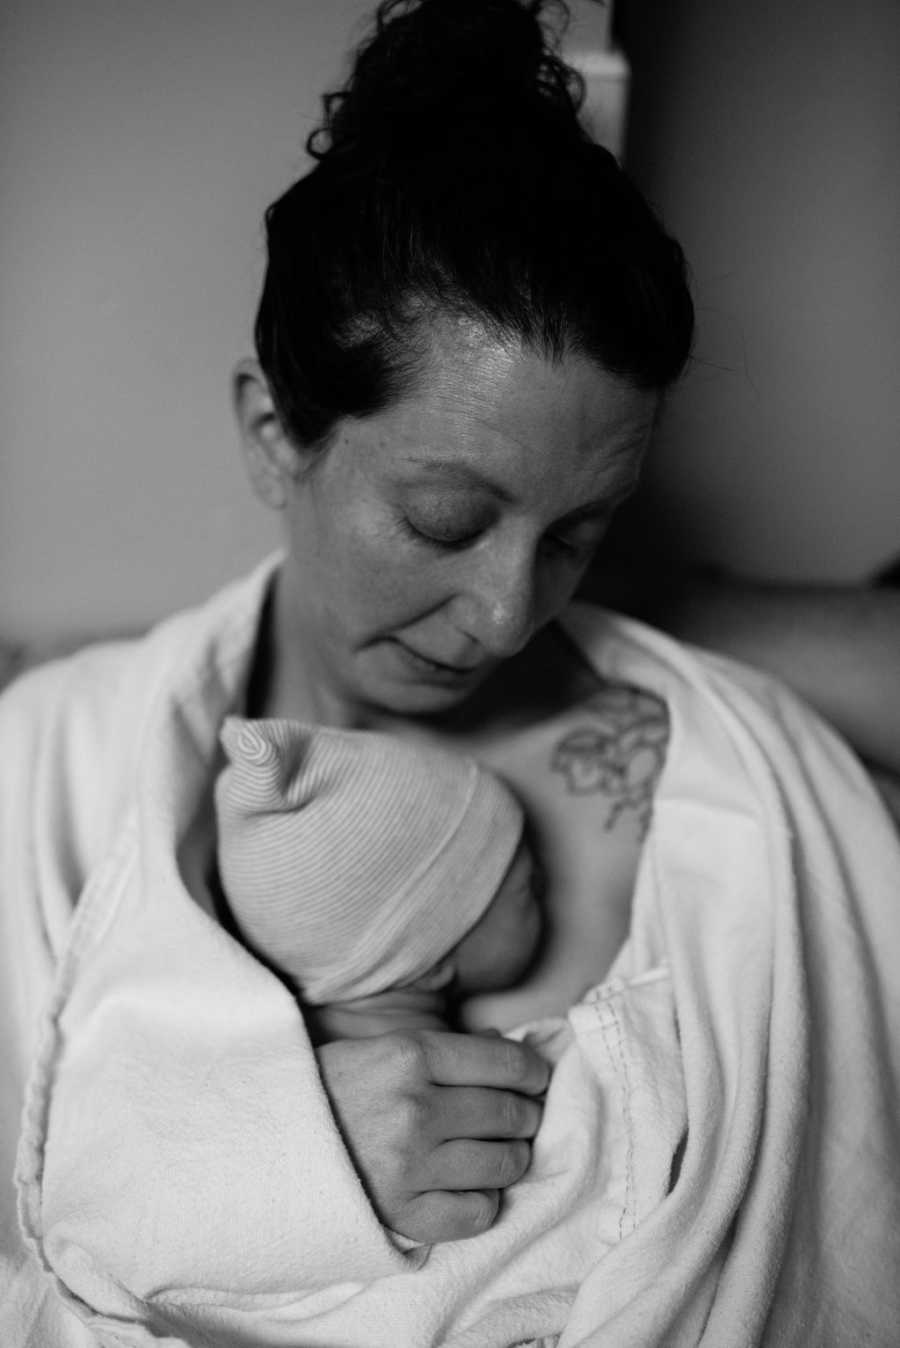 Woman looks down at adopted newborn who is laying on her bare chest